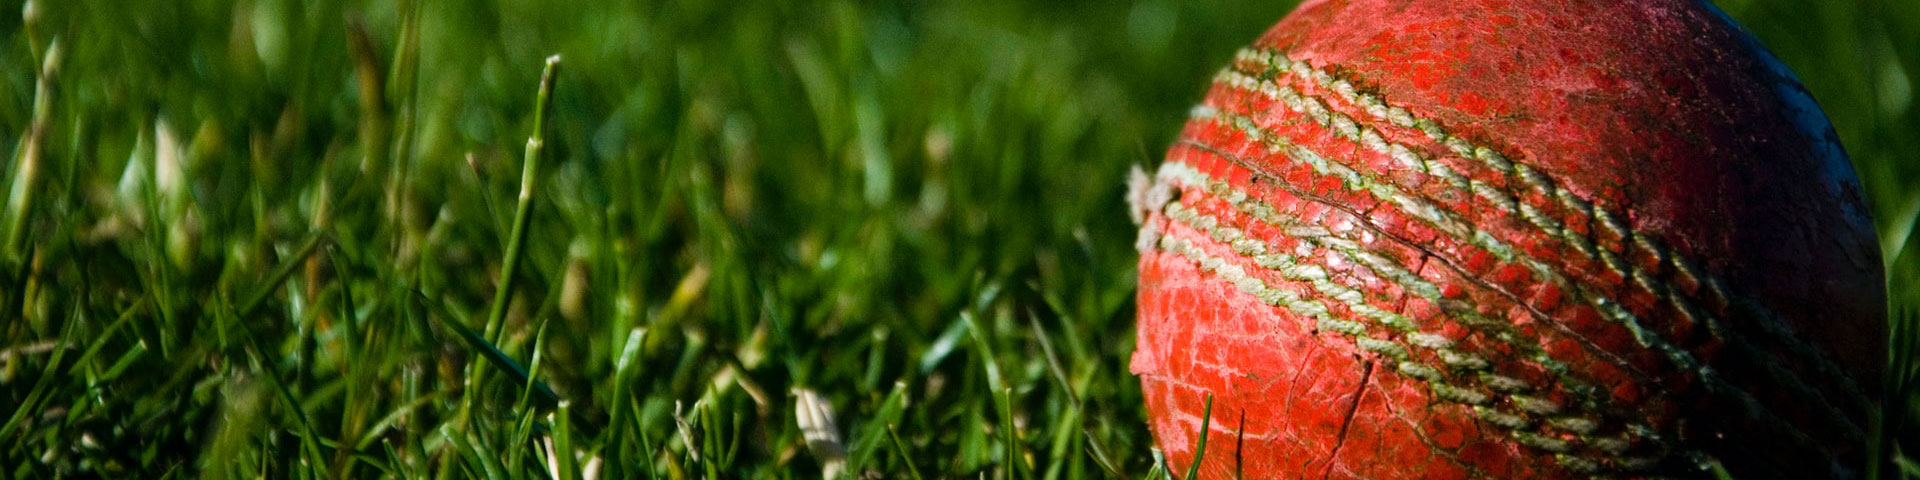 A battered cricket ball in the grass